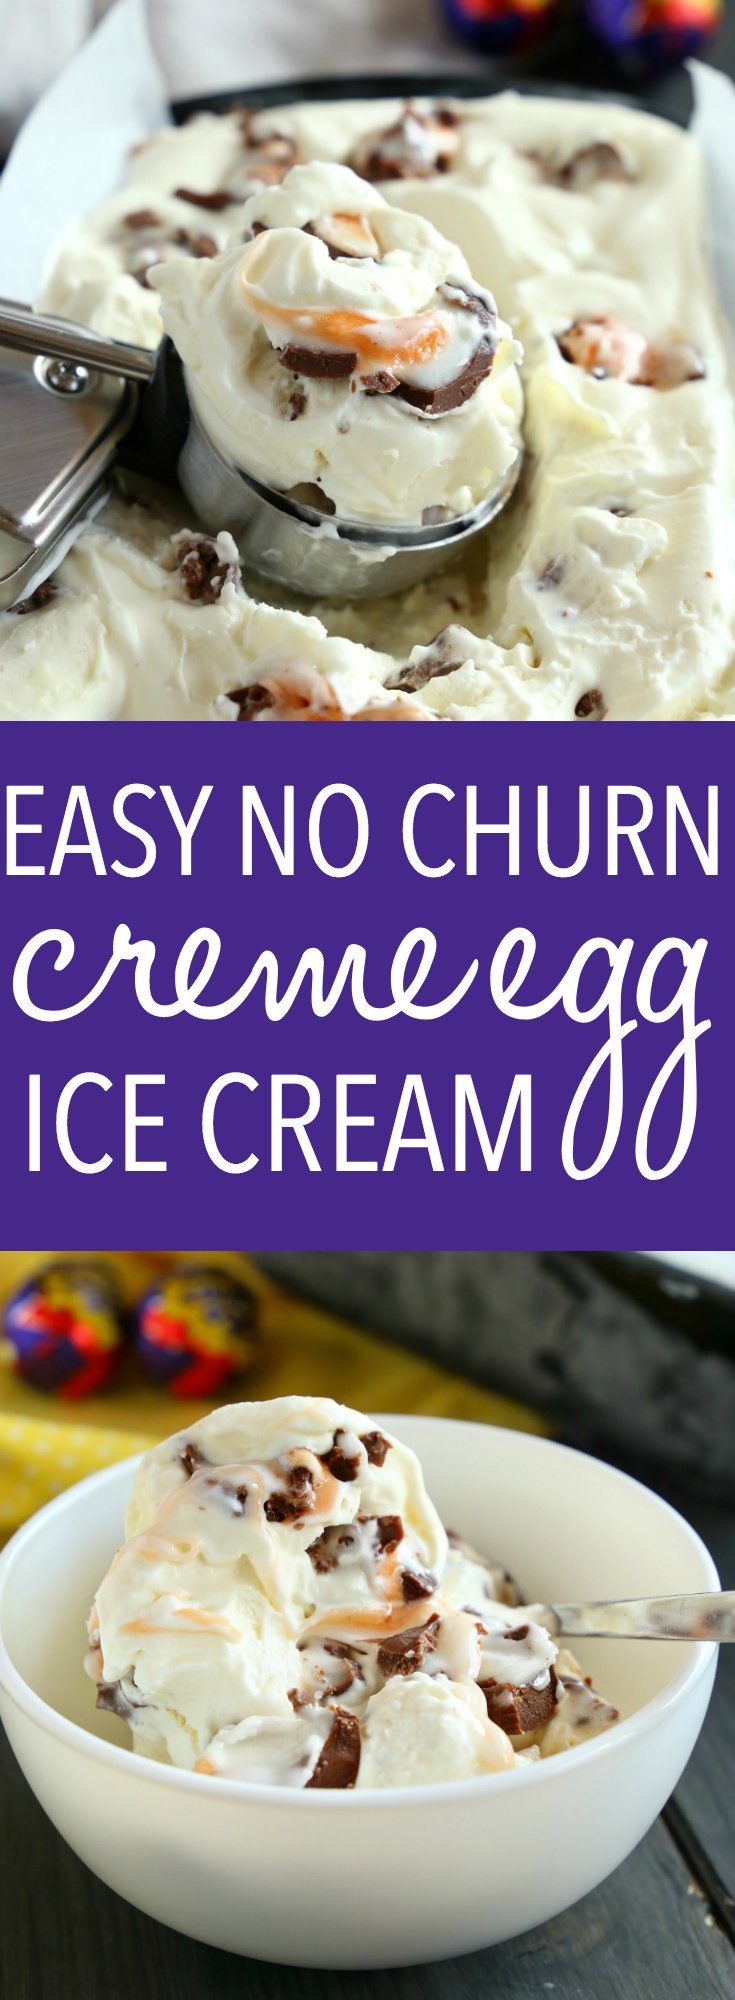 This Easy No Churn Creme Egg Ice Cream is so easy to make with only 3 ingredients! It's the perfect simple treat for spring featuring everybody's favourite Easter chocolate candy - Cadbury Creme Eggs! Recipe from thebusybaker.ca! #cremeeggdessert #cremeeggicecream #easynochurnicecream #easyhomemadeicecream via @busybakerblog